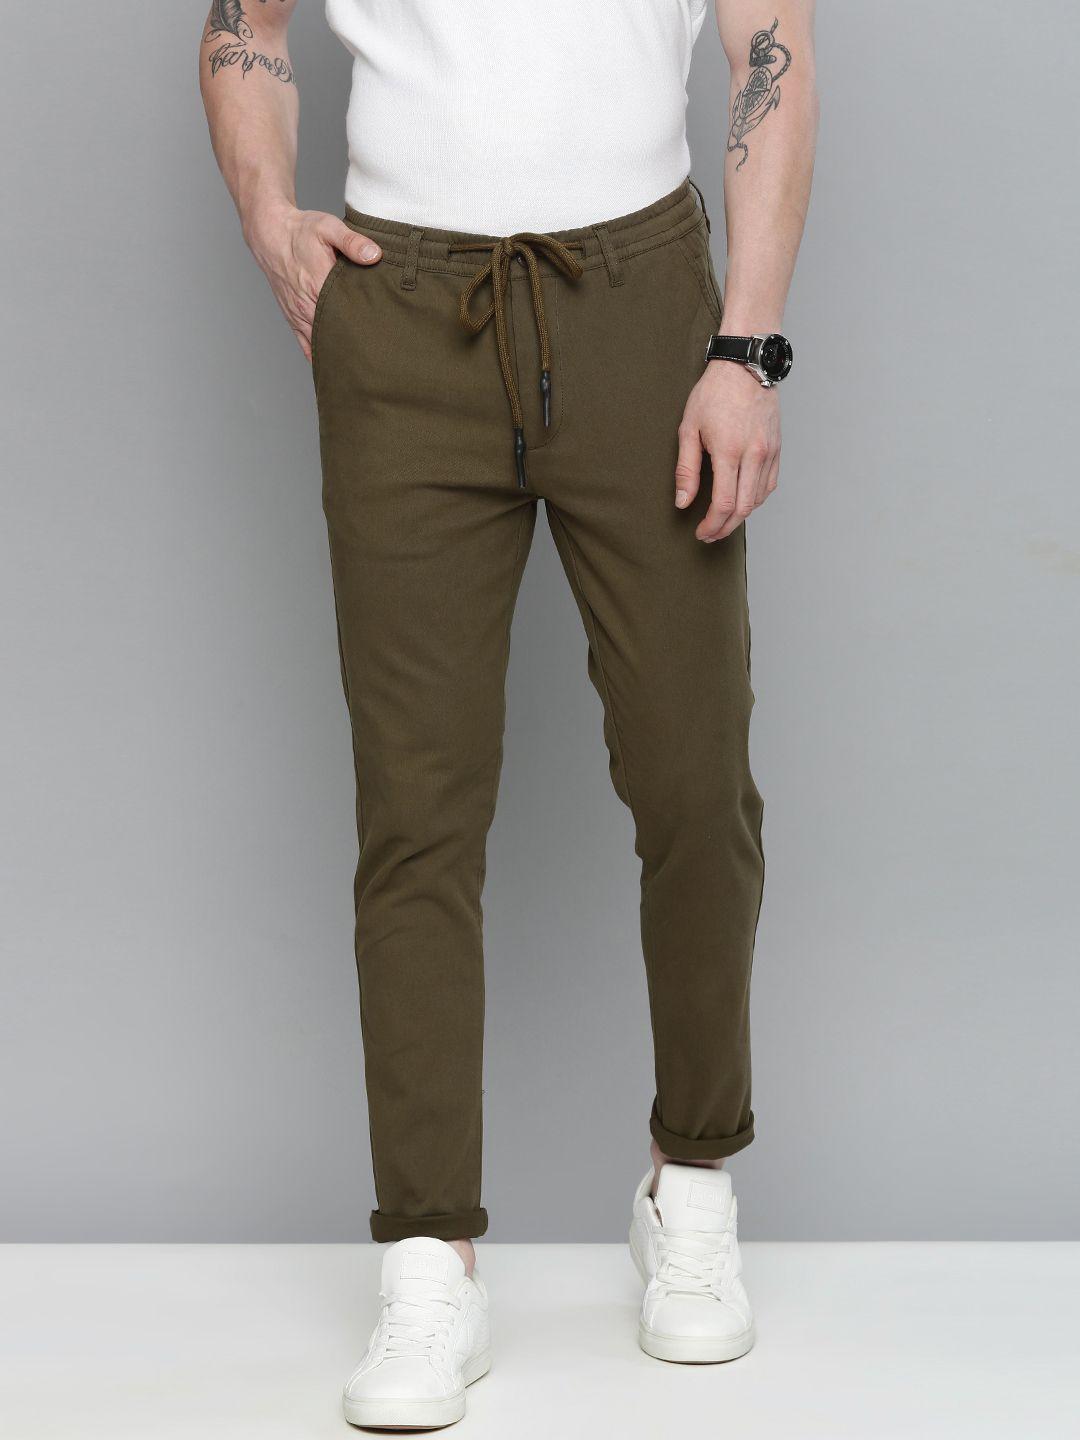 the-indian-garage-co-men-olive-green-slim-fit-chinos-trousers